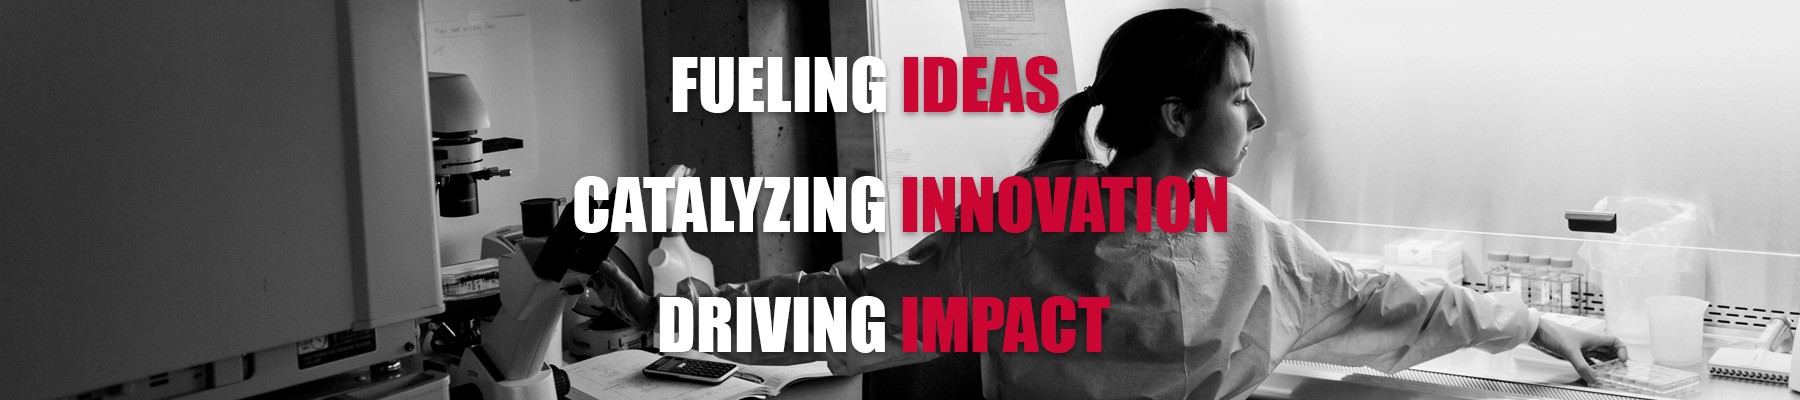 Fueling ideas, catalyzing innovation, driving impact